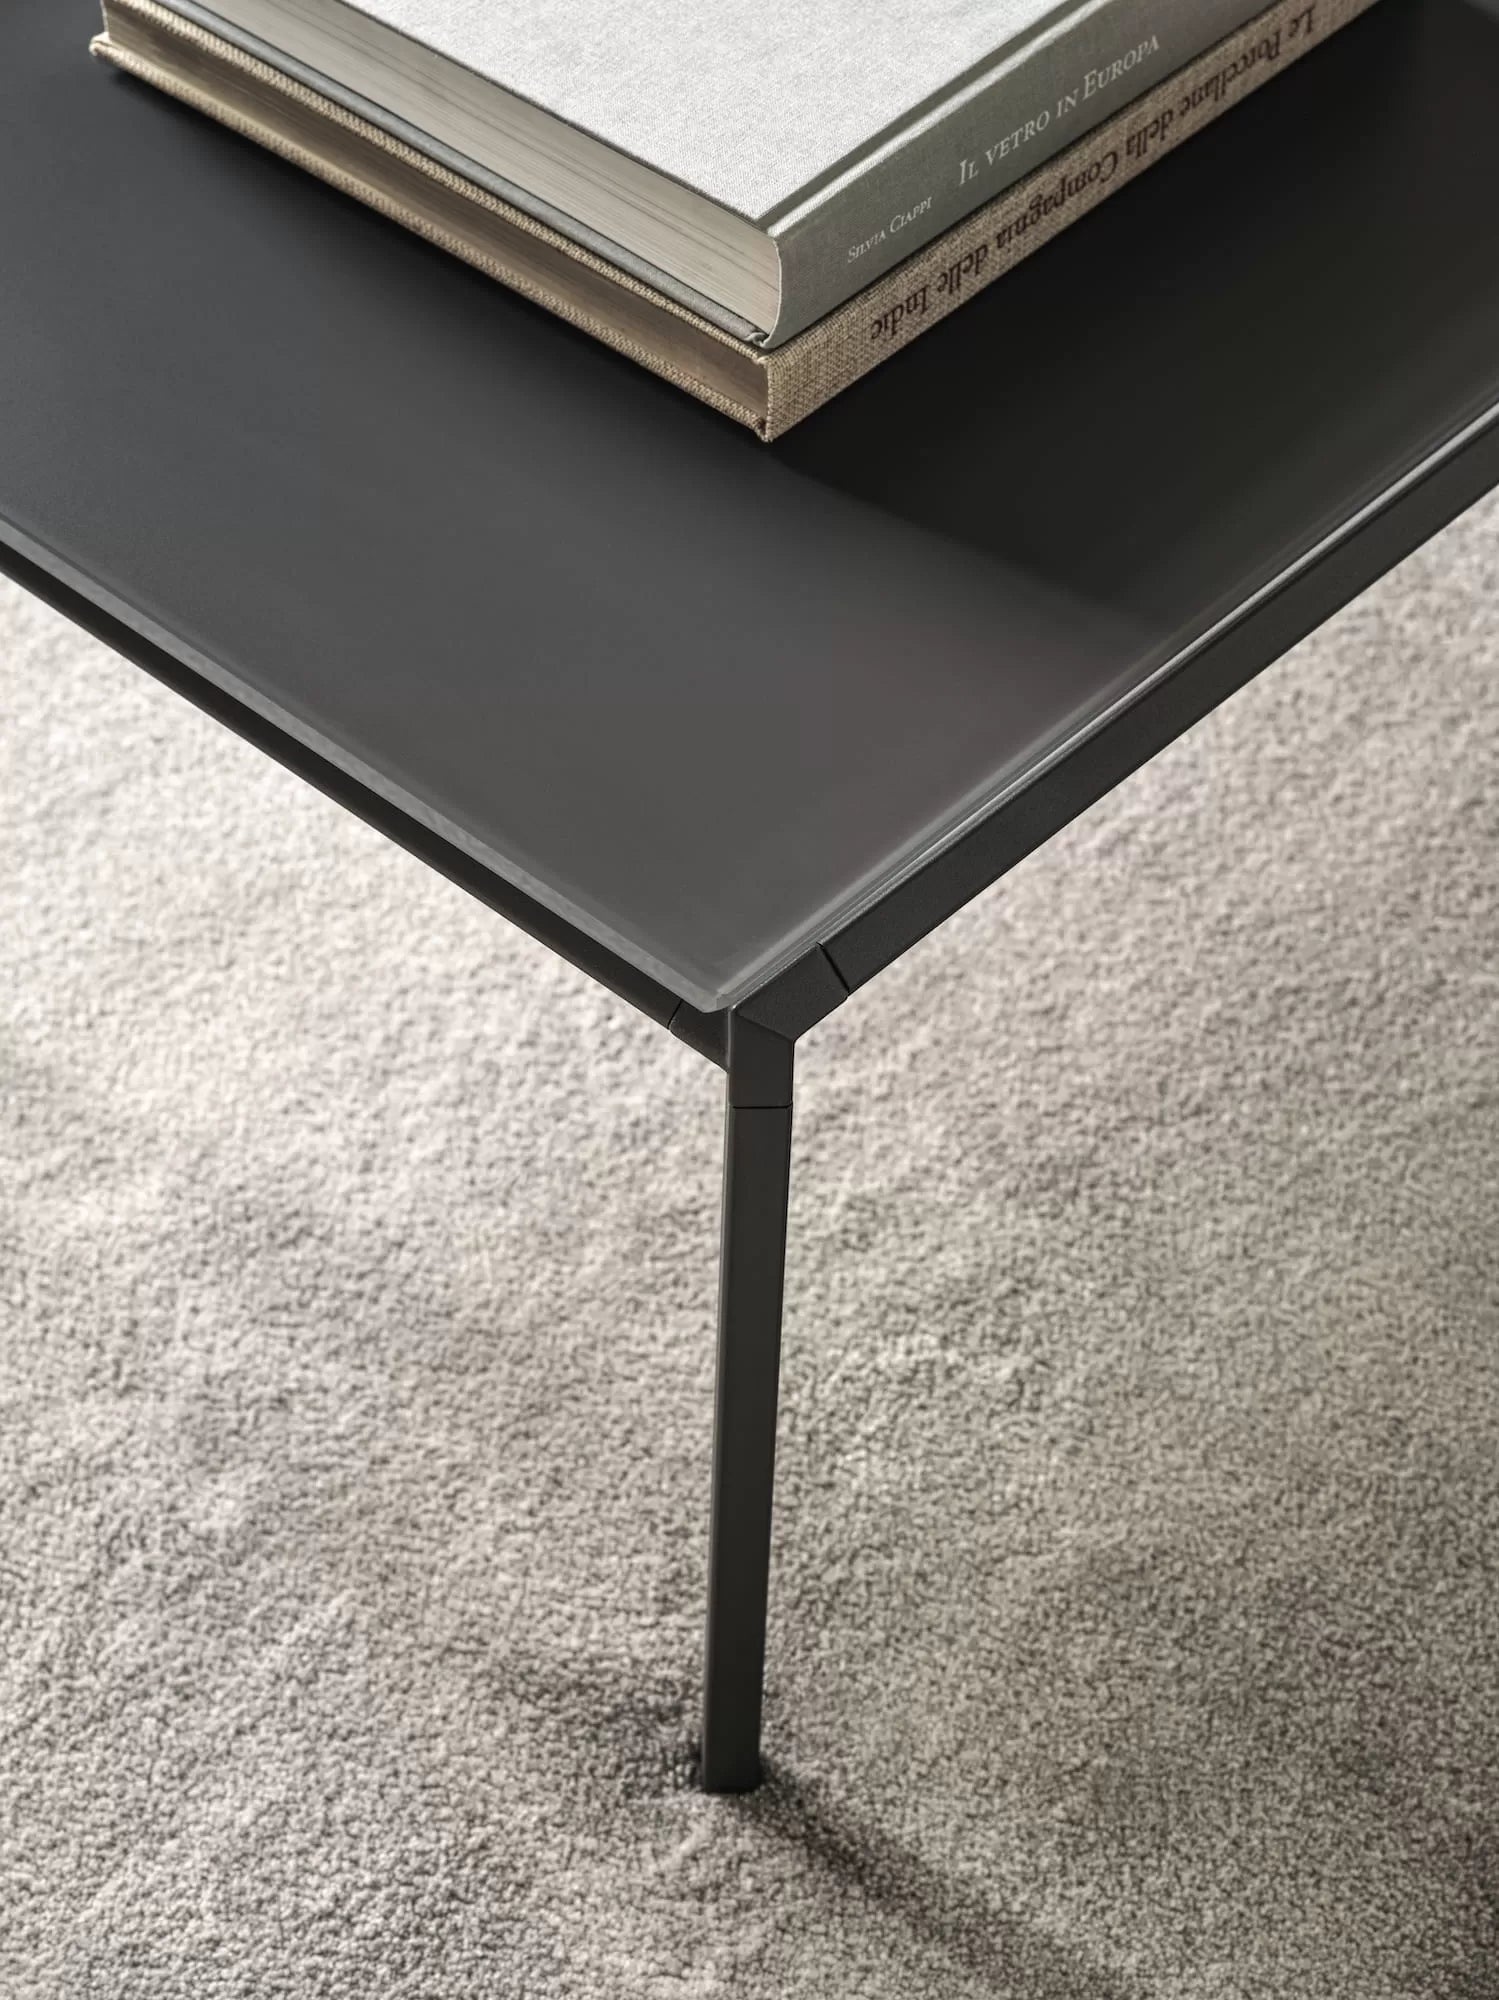 Diagonal Coffee Table With Lacquered Metal Frame 06 05